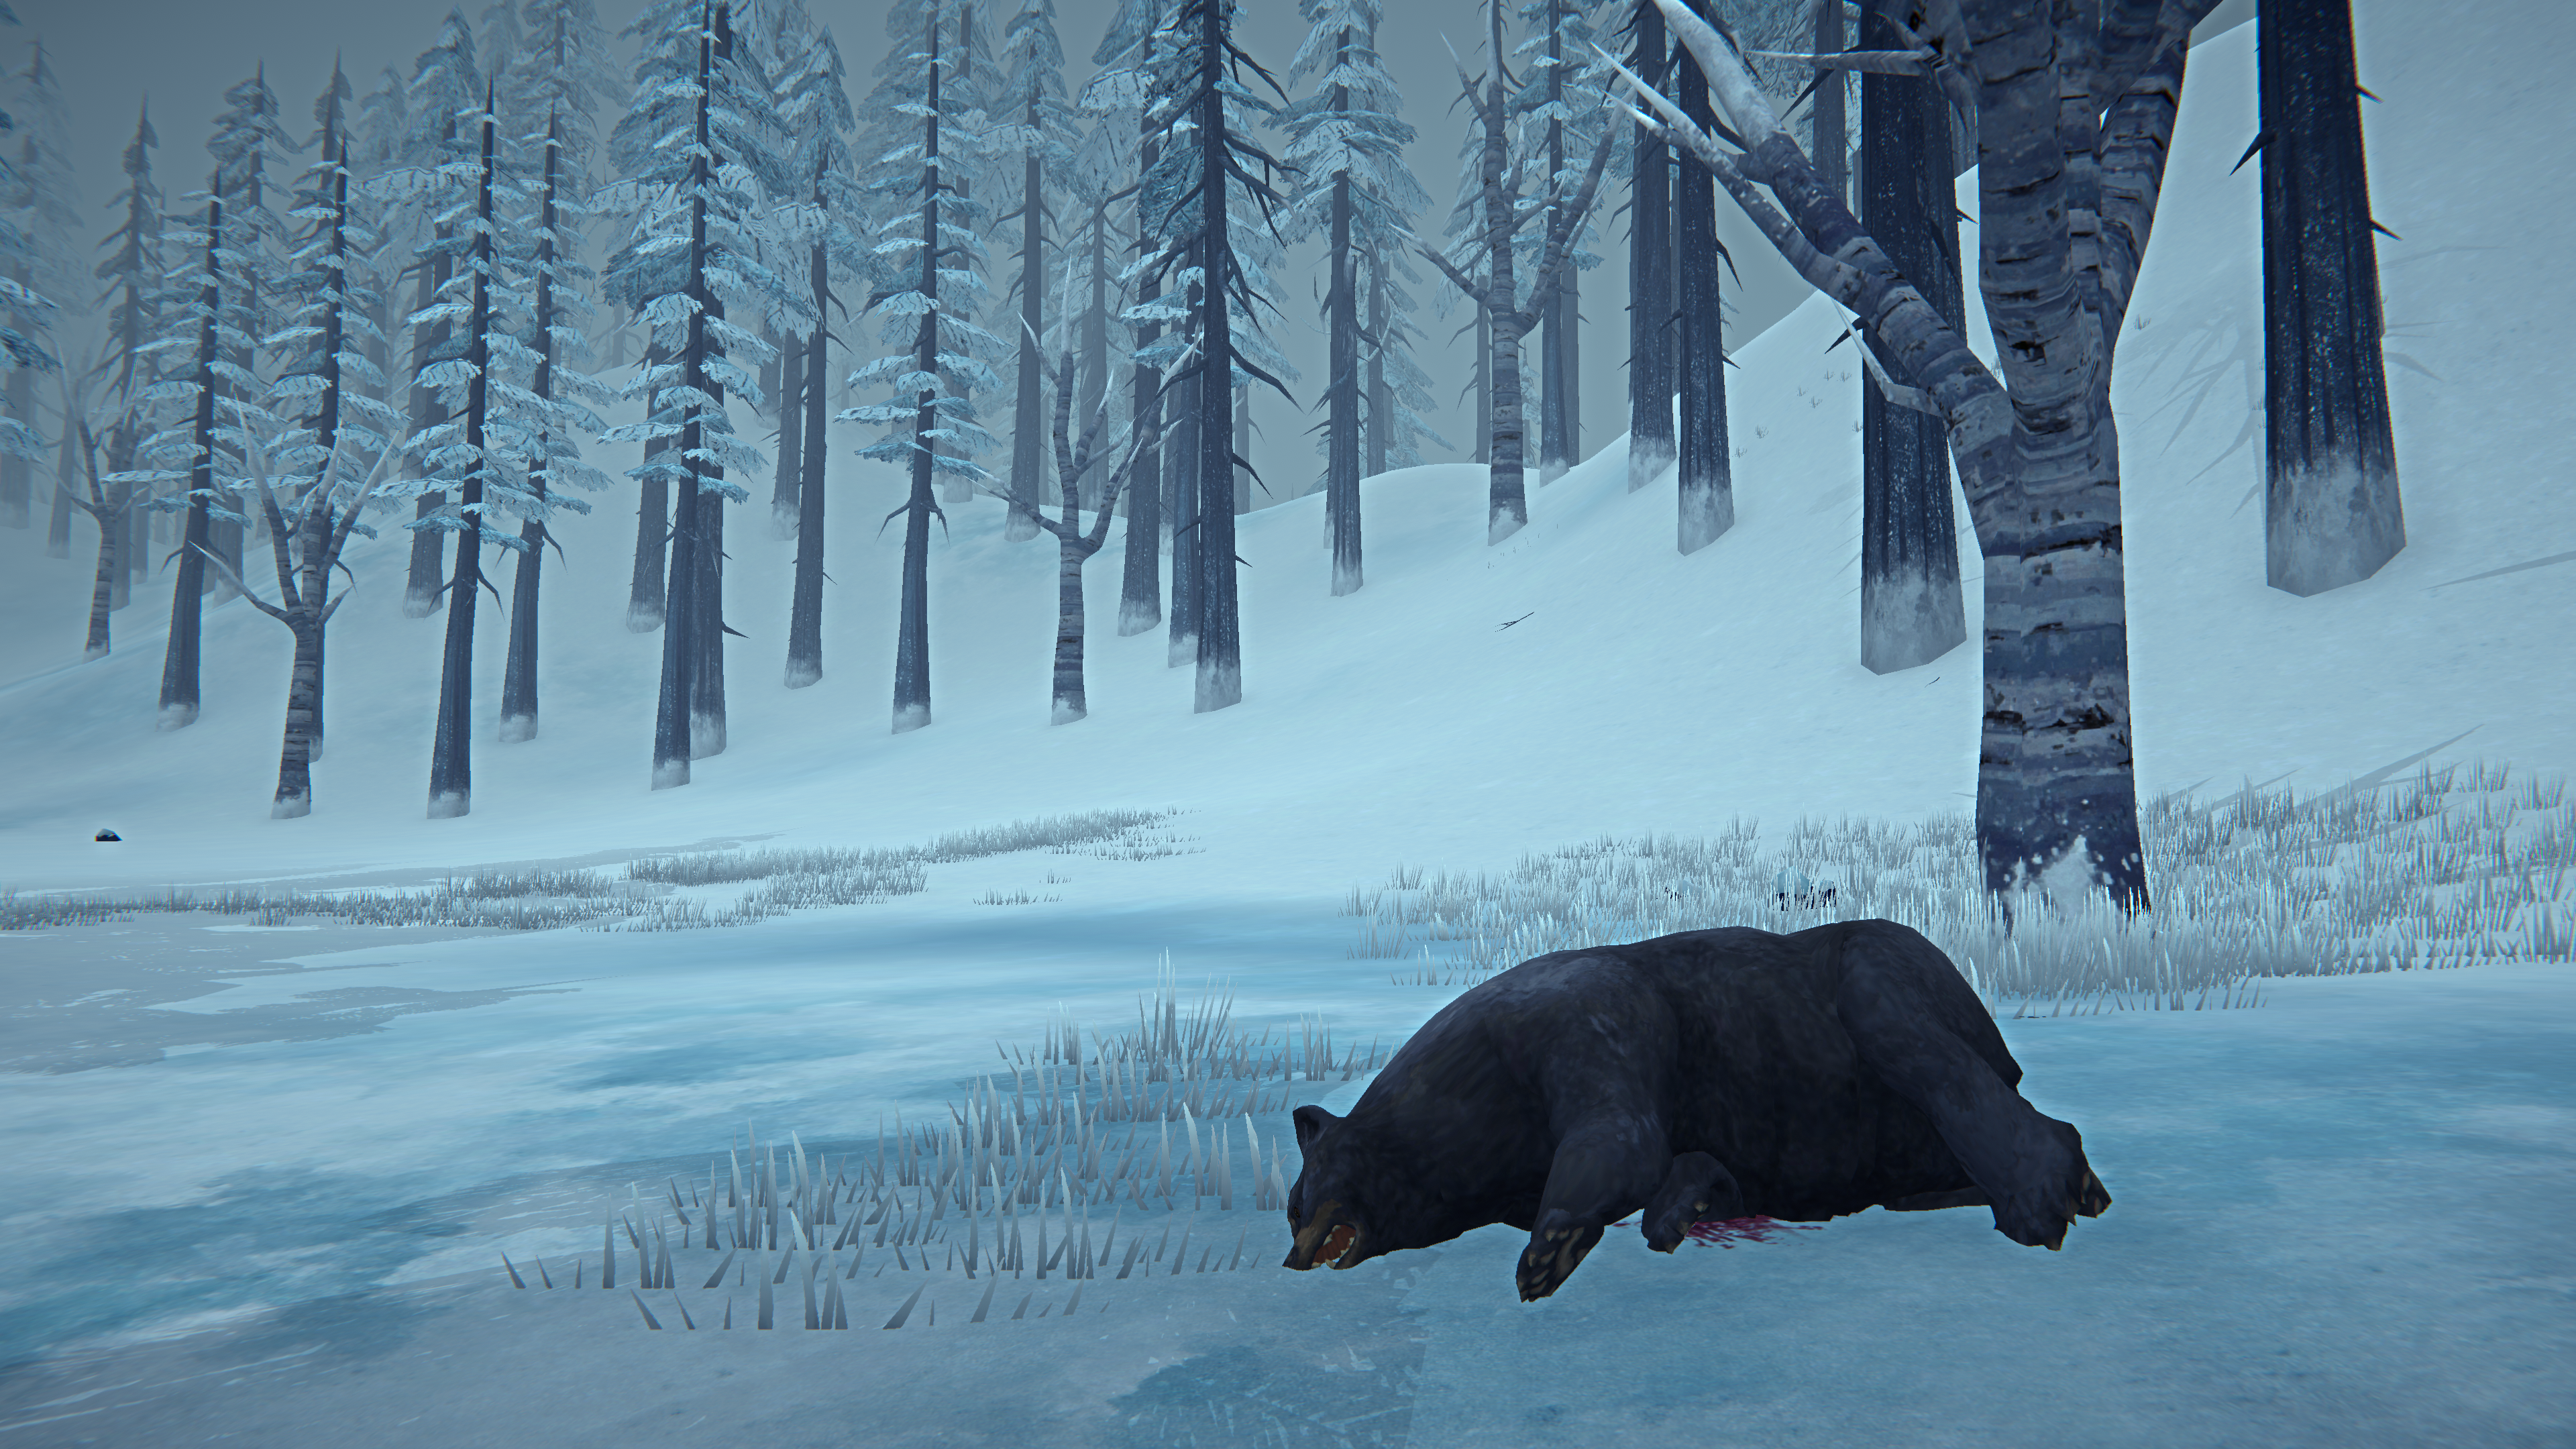 The Long Dark PC Gaming Video Games Video Game Landscape Survival Screen Shot Snow Bears Hunting Win 3840x2160